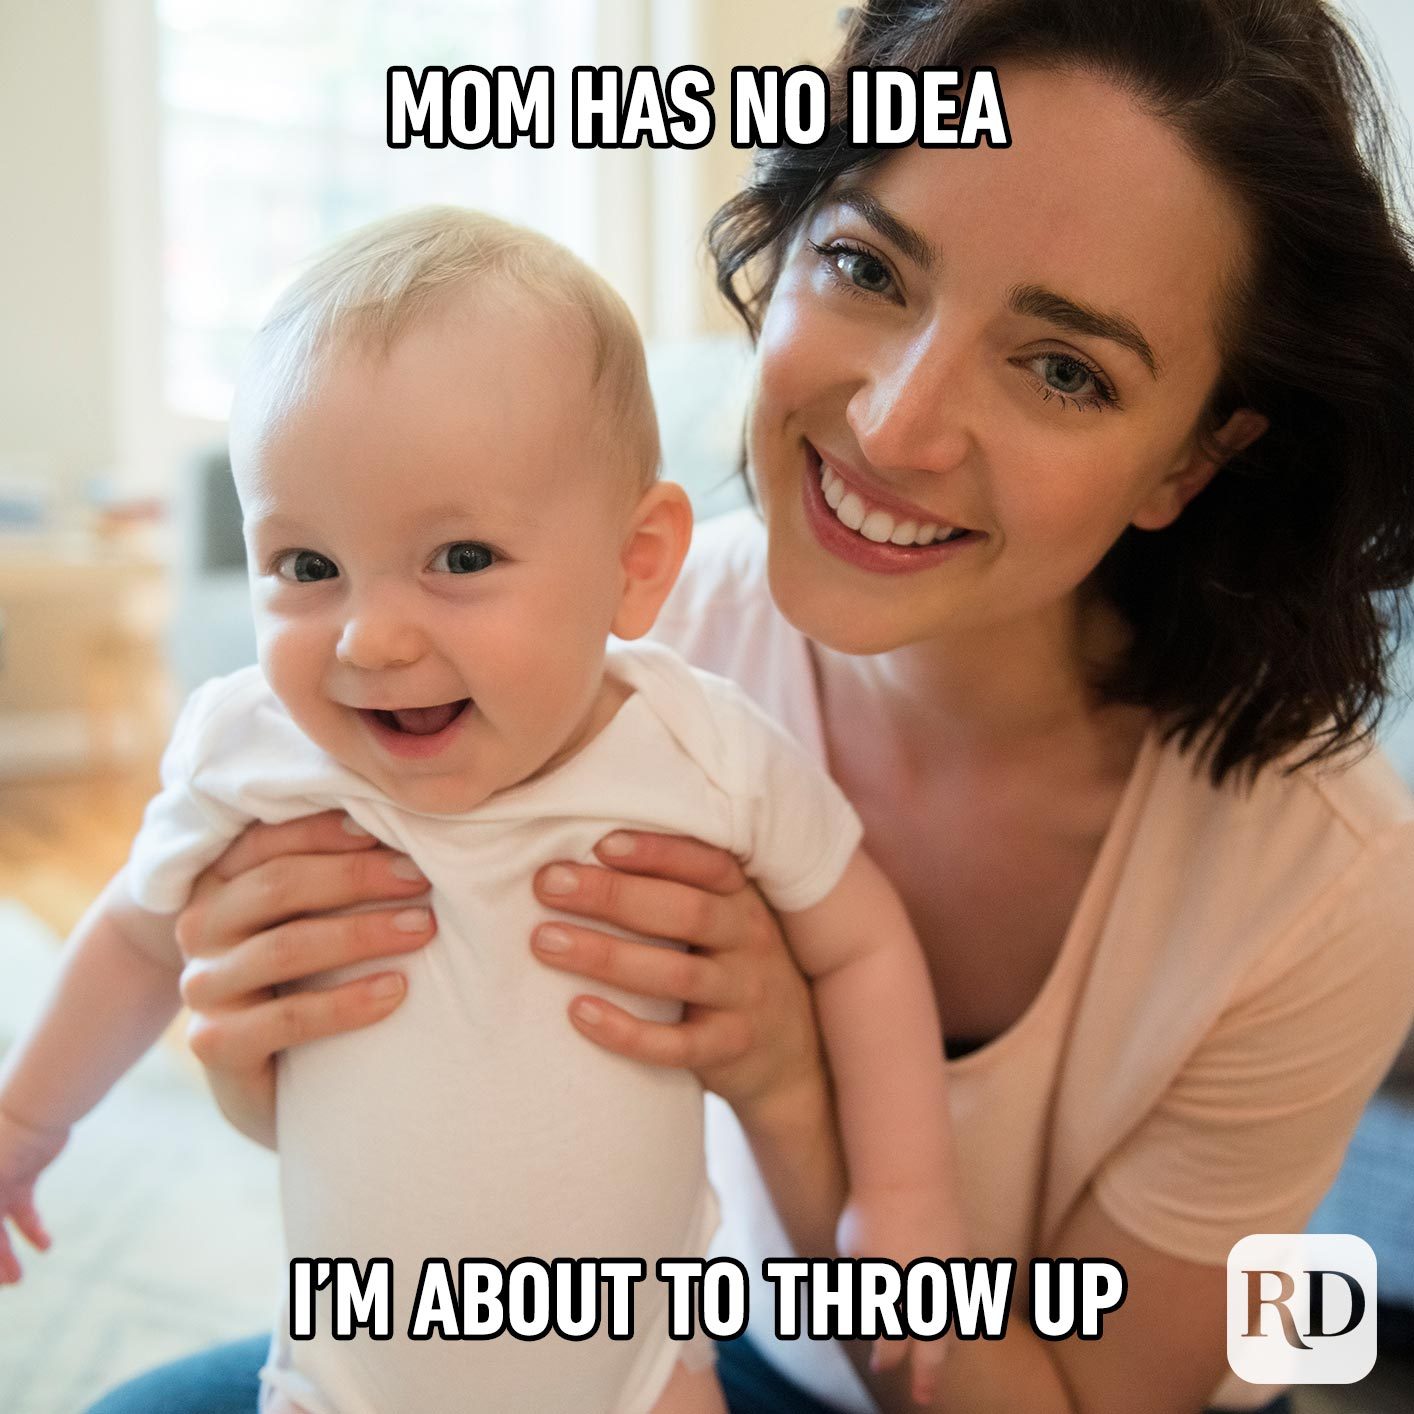 Mother holding baby, both smiling. Meme text: Mom has no idea I’m about to throw up.